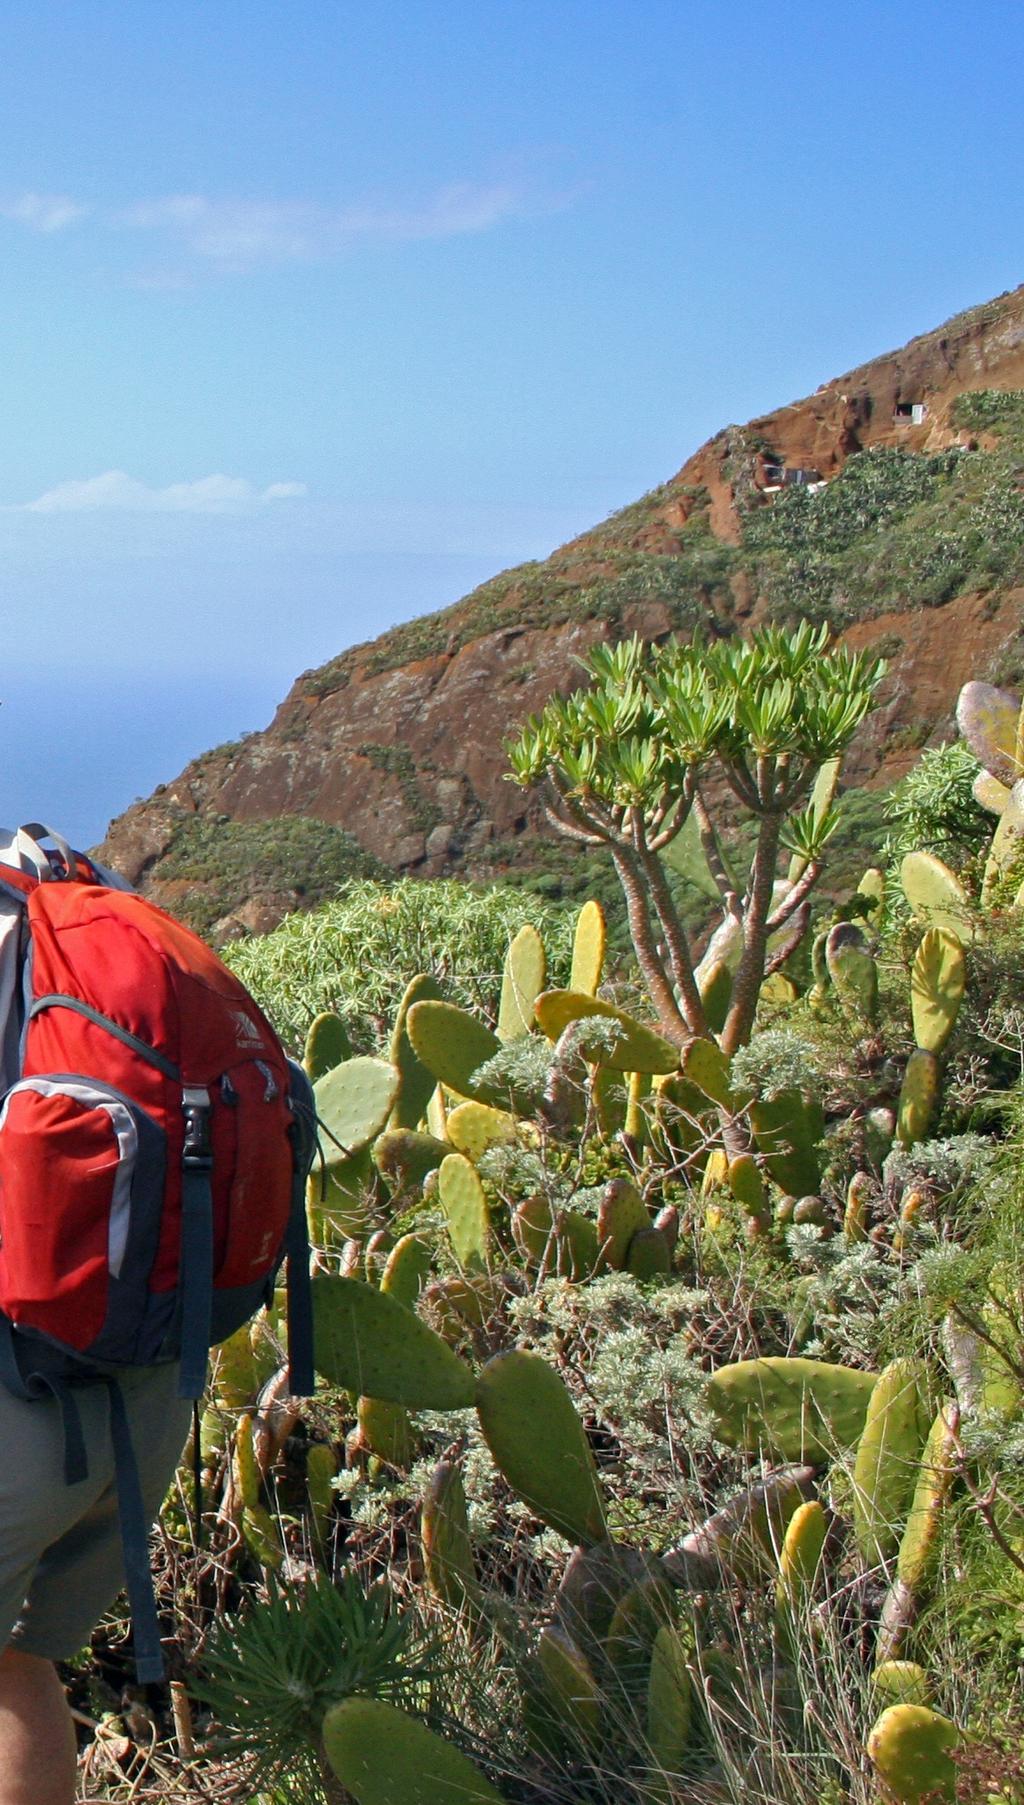 Admire the views across Tenerife to Mount Teide and across the ocean to La Palma and